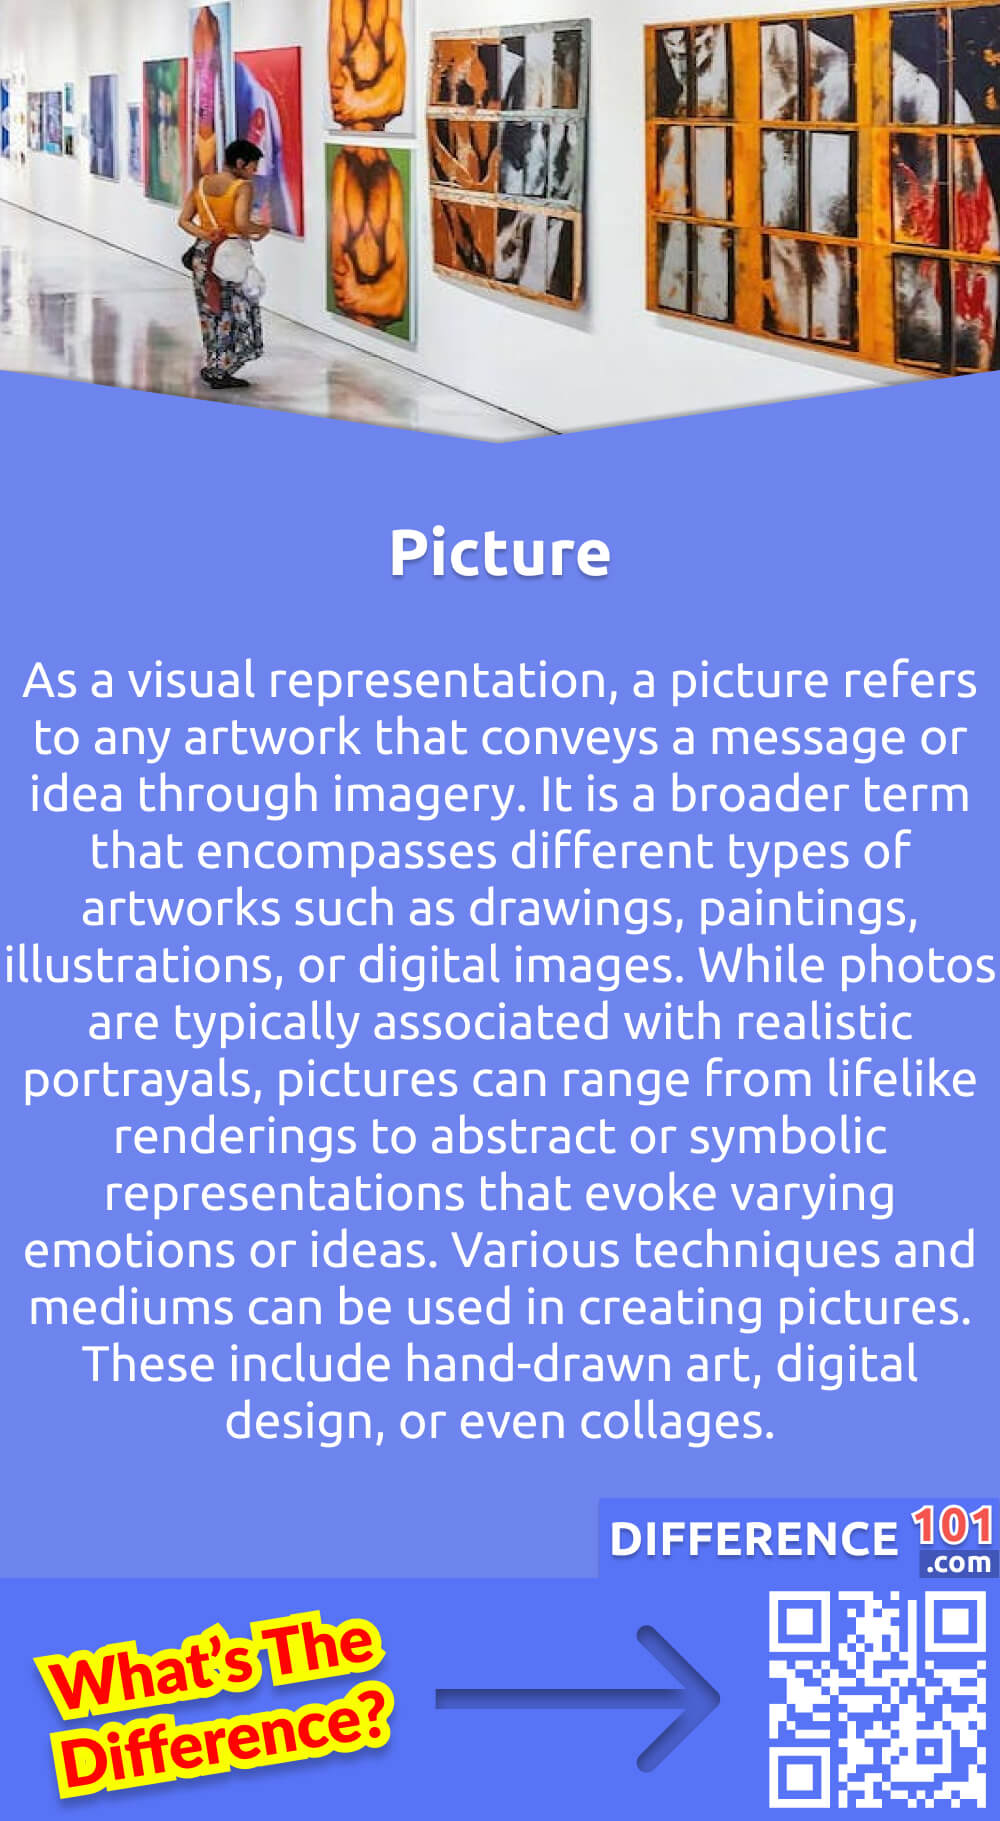 What Is Picture? As a visual representation, a picture refers to any artwork that conveys a message or idea through imagery. It is a broader term that encompasses different types of artworks such as drawings, paintings, illustrations, or digital images. While photos are typically associated with realistic portrayals, pictures can range from lifelike renderings to abstract or symbolic representations that evoke varying emotions or ideas. Various techniques and mediums can be used in creating pictures. These include hand-drawn art, digital design, or even collages. As such, pictures are a powerful tool for communication and expression, and they play an essential role in various fields such as advertising, design, and art.